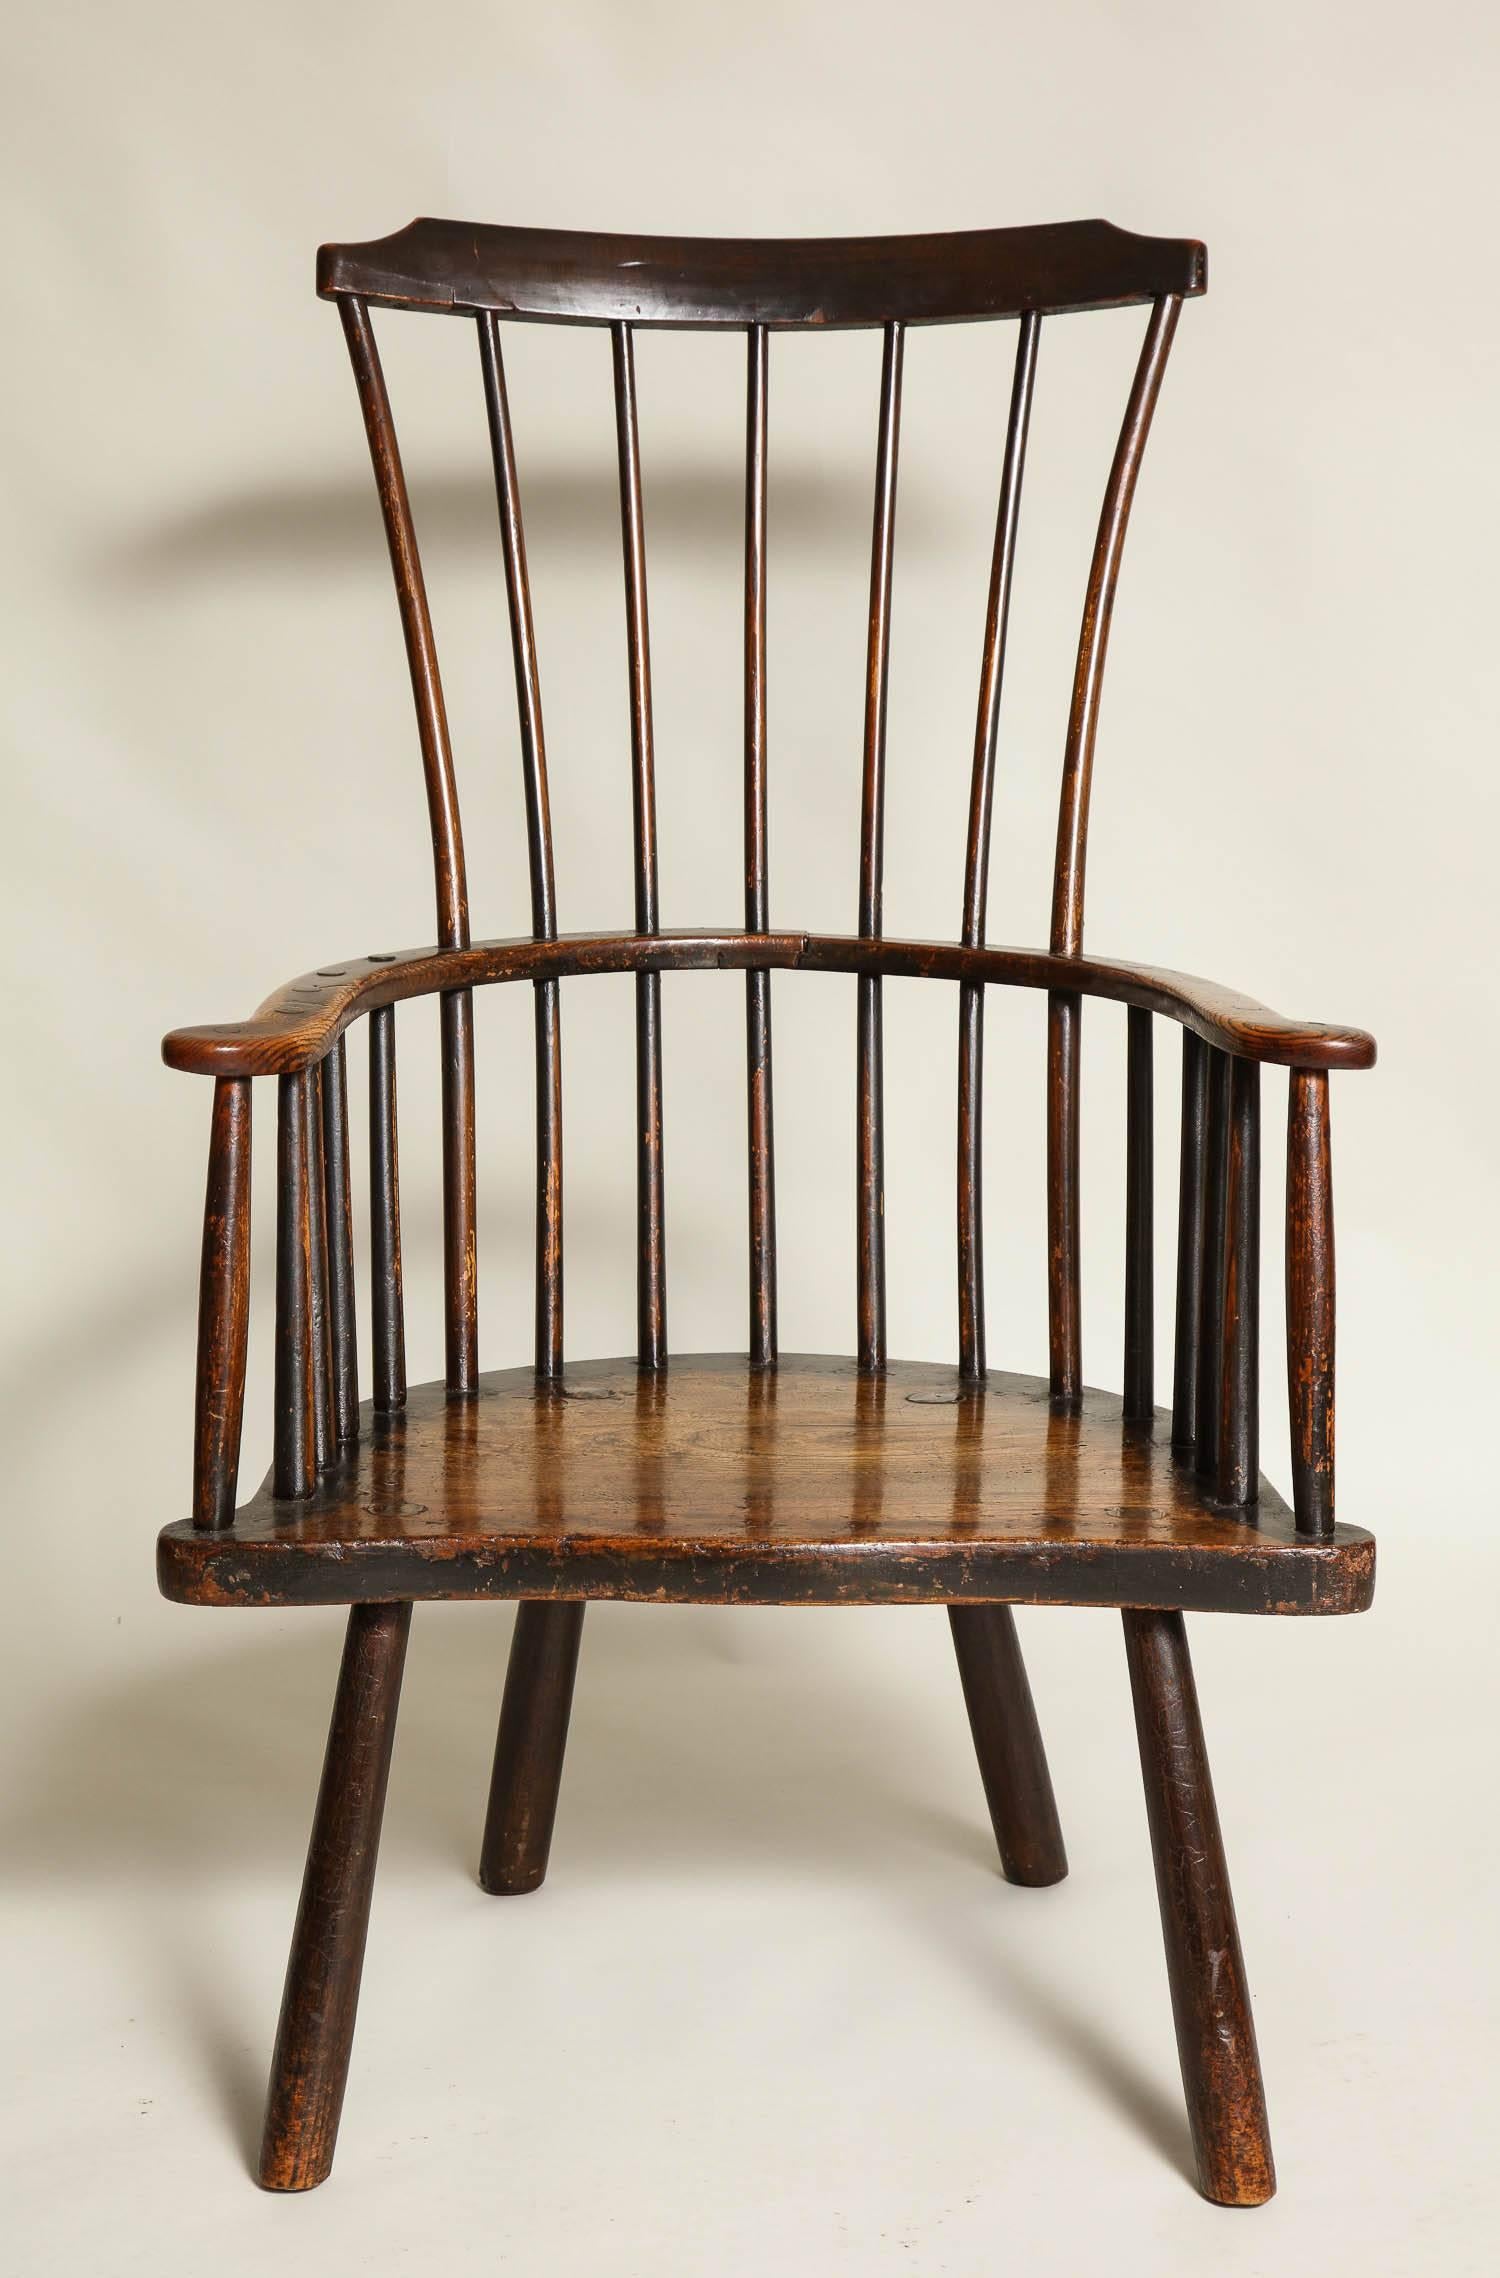 Fine 18th century English comb back windsor armchair, probably West Country, the shaped crest supported by spoke-shaved spindles, the continuous arm and shallow seat with same profile, standing on four spoke shaved pole legs, the whole possessing a